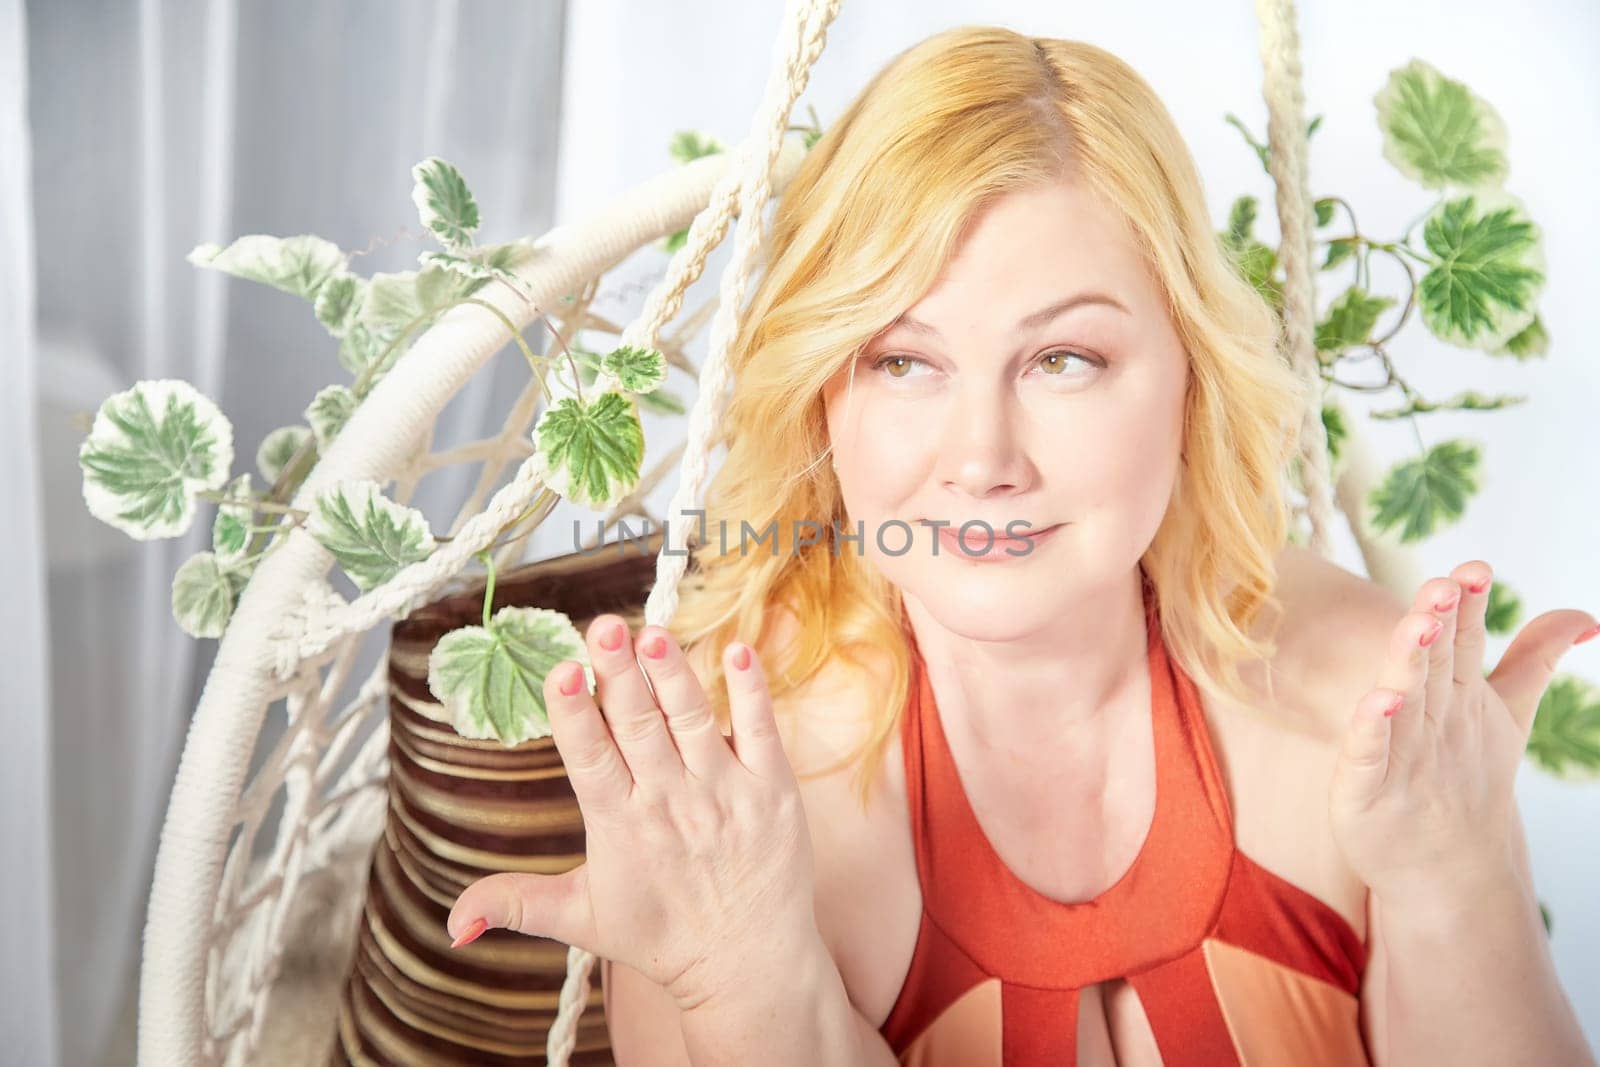 Portrait of Funny cute mature adult woman with blonde hair posing in a swimsuit in a wicker chair with plants. Fat middle-aged lady in underwear in studio. The concept of body positivity and happy by keleny